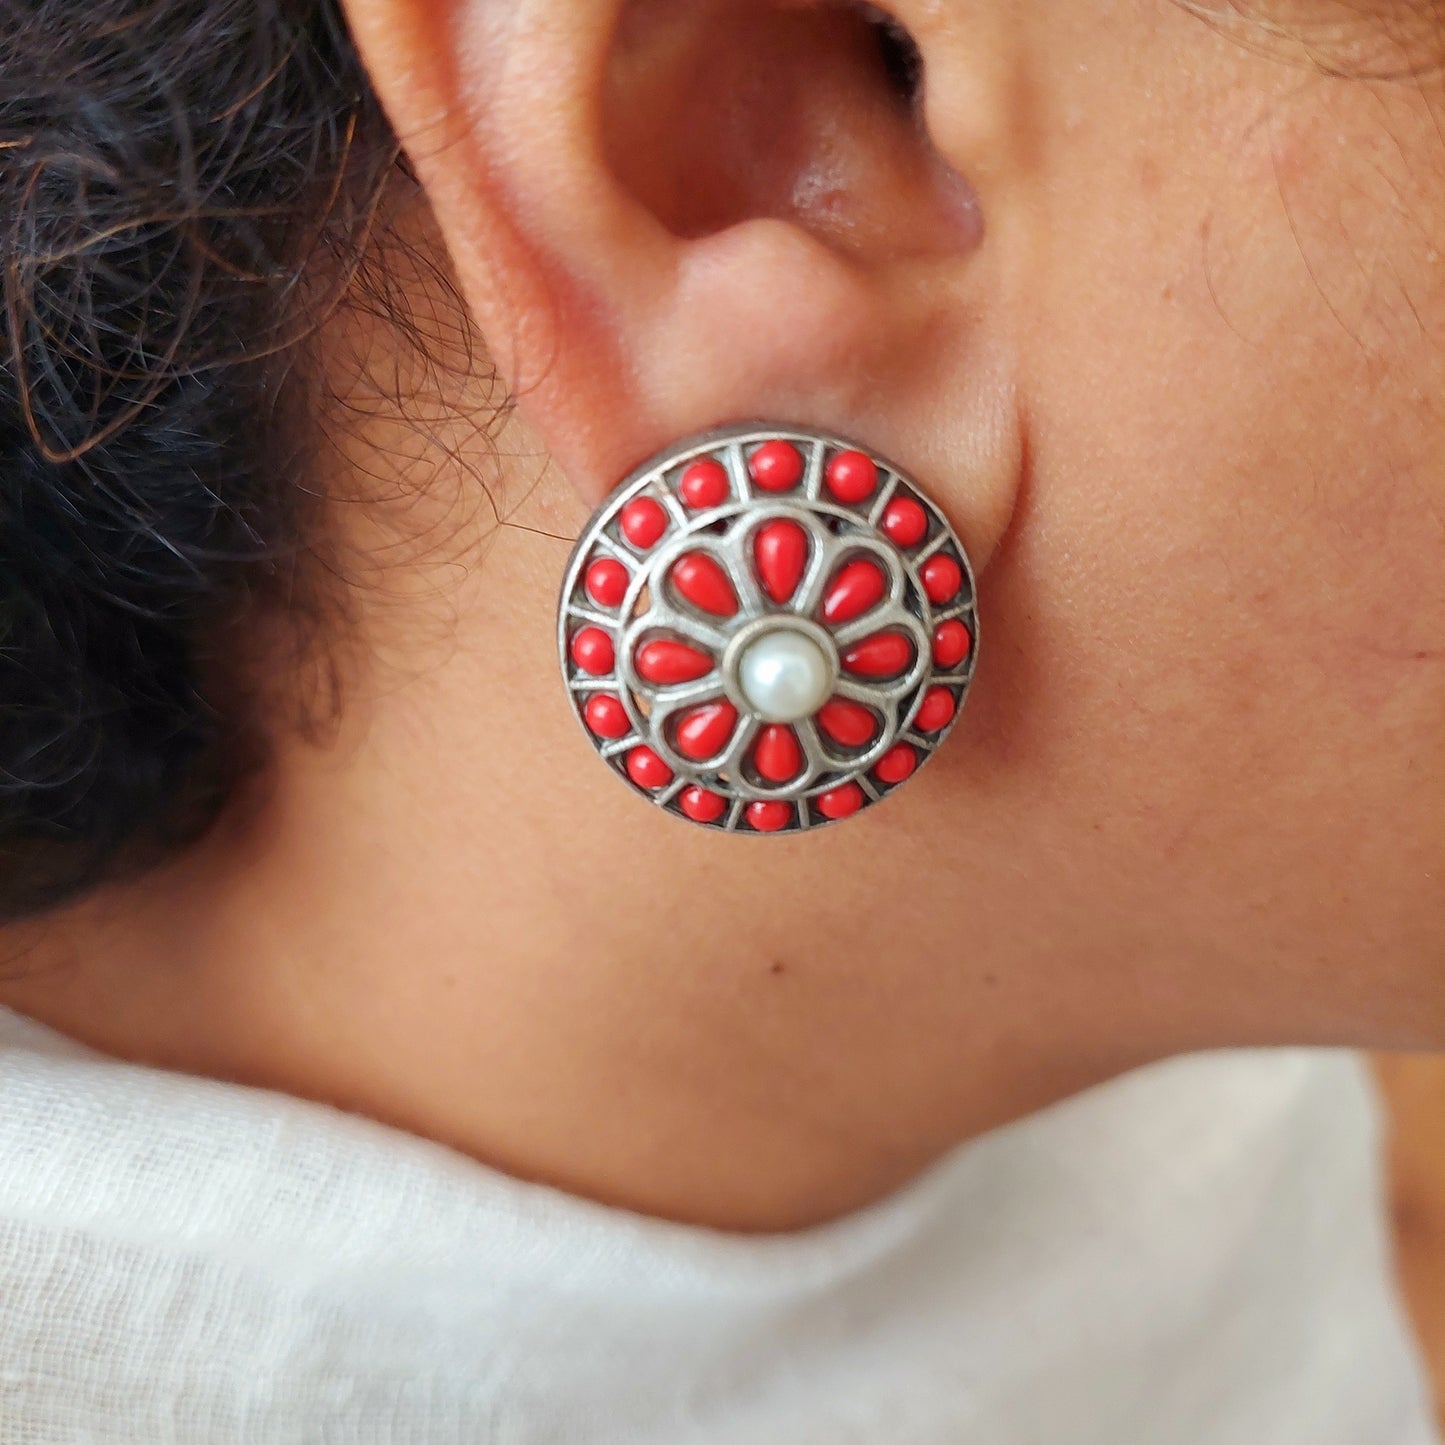 Stone Studded Silver Look alike Round Studs - Coral and Pearl